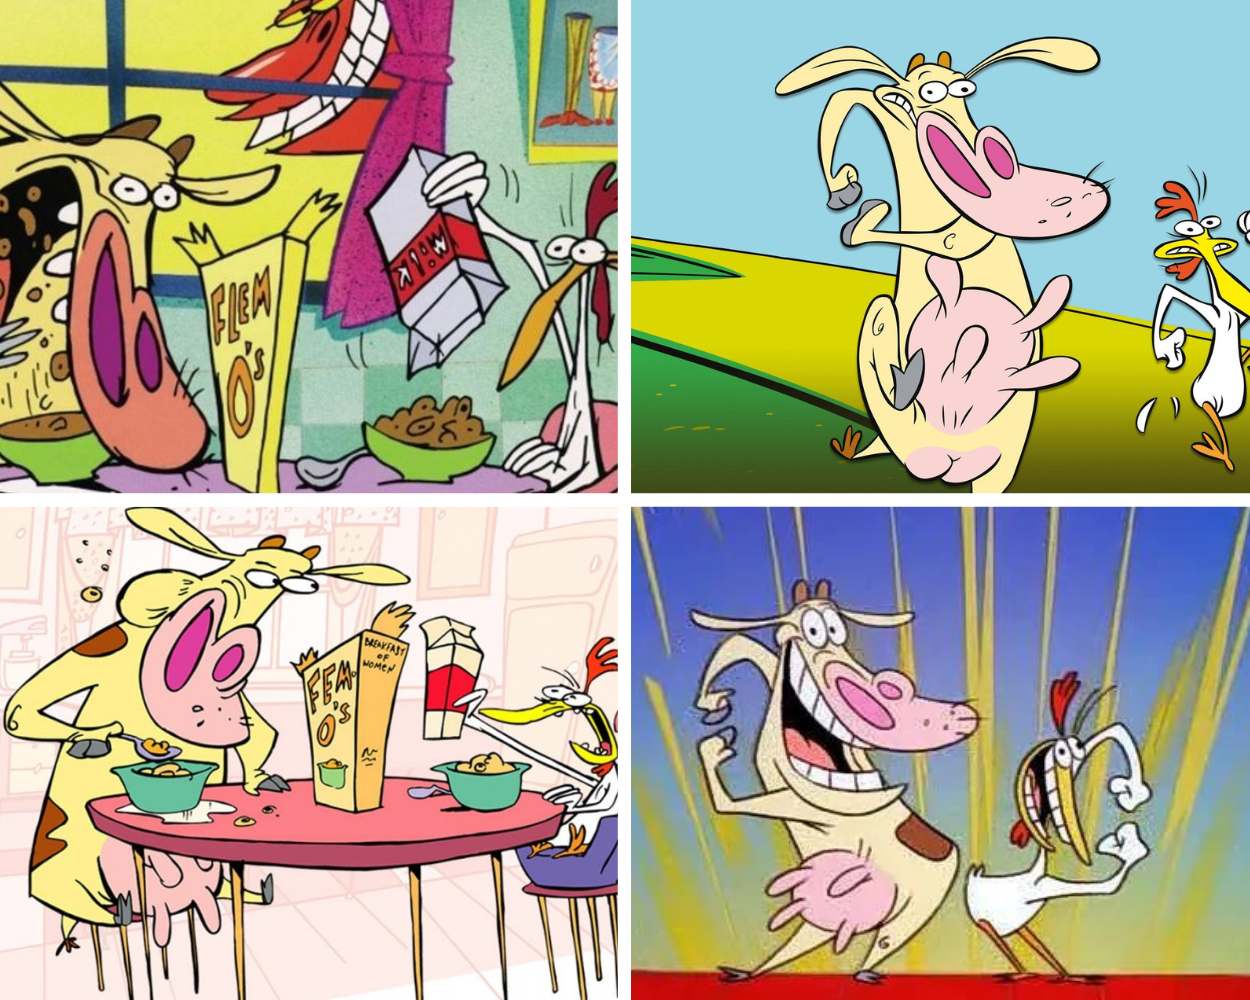 Cow and Chicken (1997 - 1999)